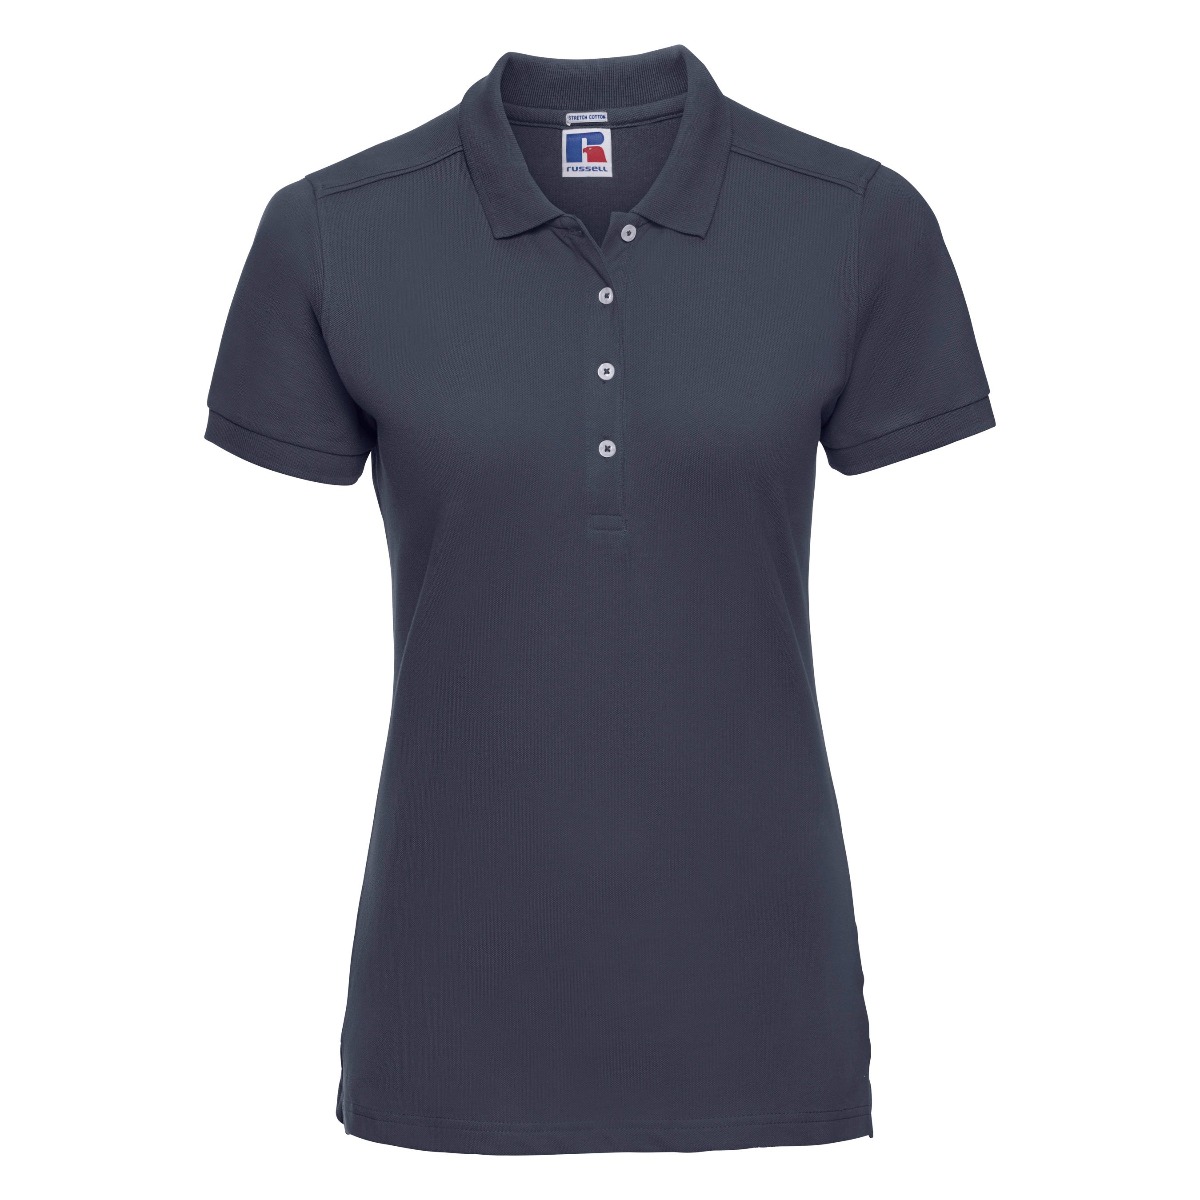 ax-httpswebsystems.s3.amazonaws.comtmp_for_downloadrussell-womens-stretch-french-navy_4.jpg